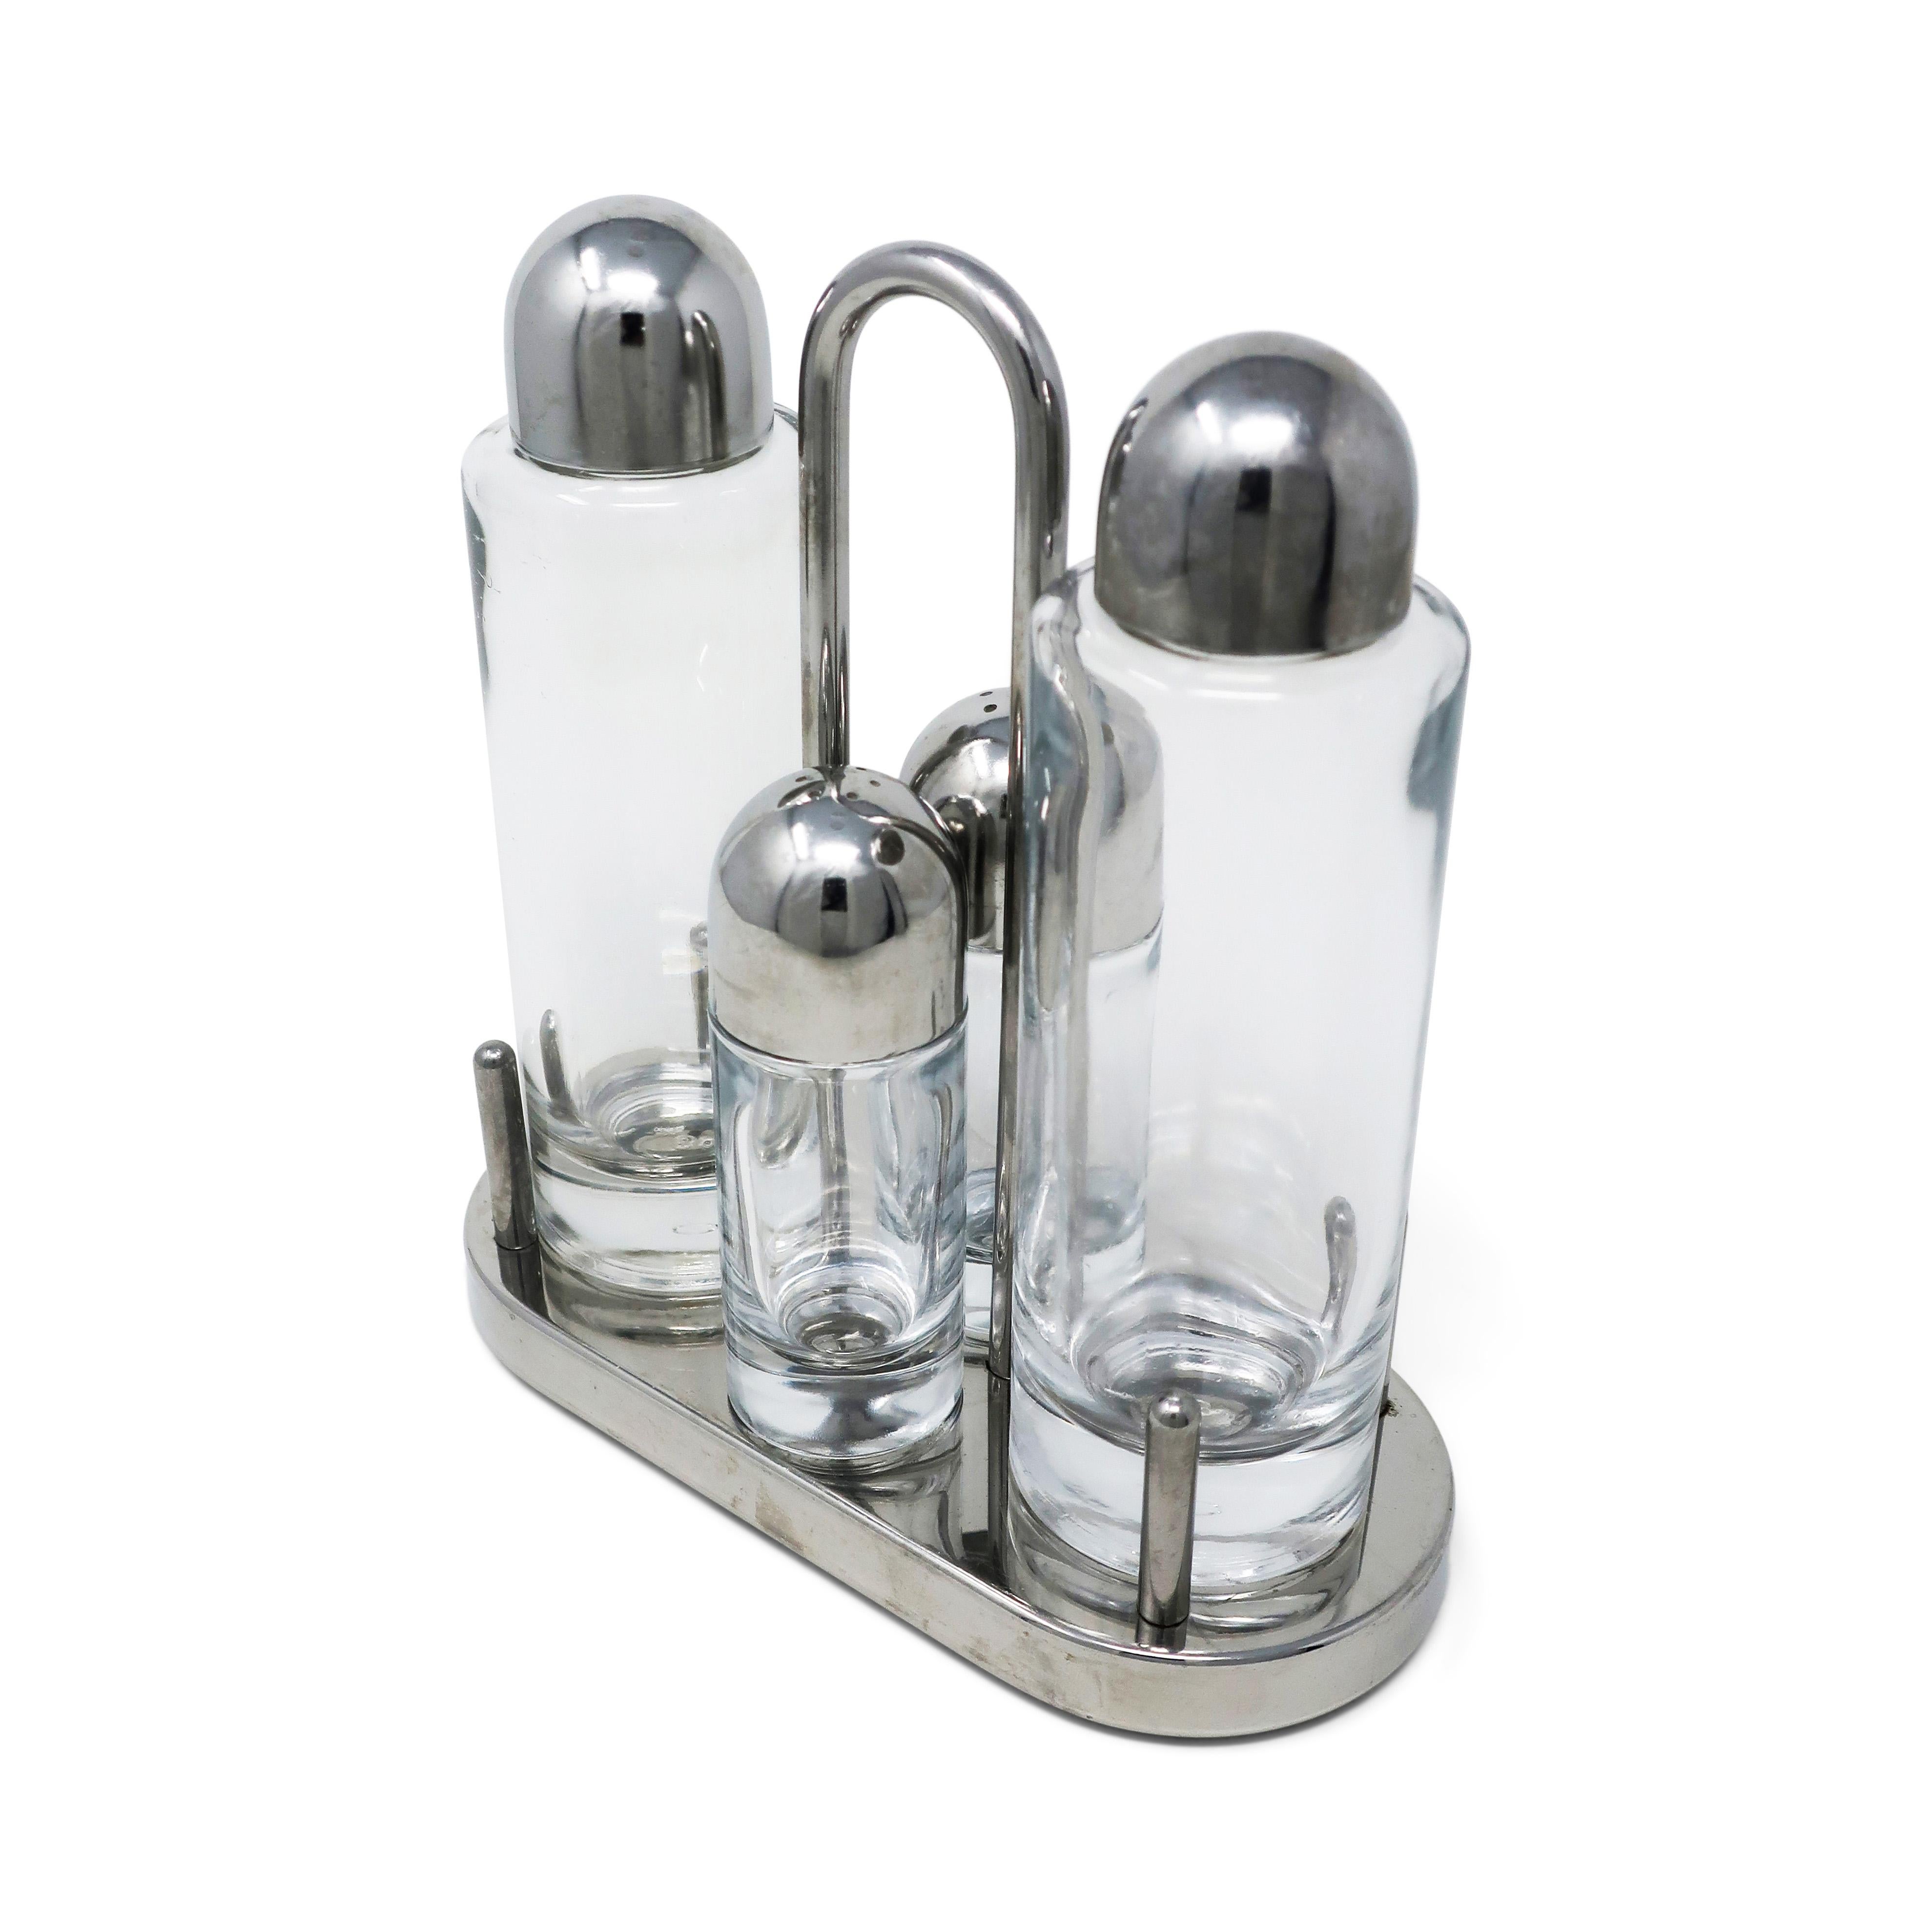 Stainless Steel and Glass Cruet Set by Ettore Sottsass for Alessi  In Good Condition For Sale In Brooklyn, NY